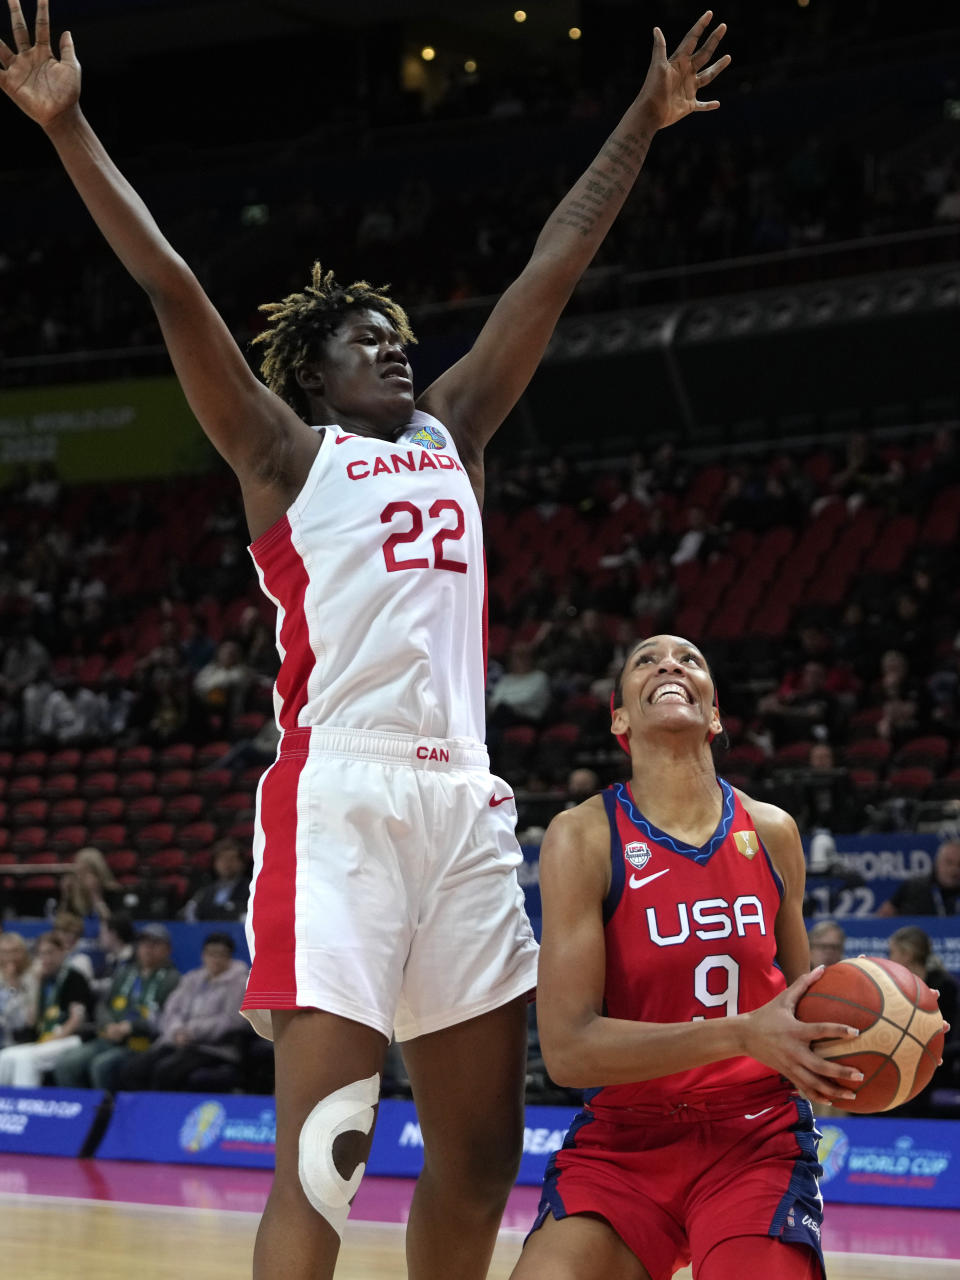 Canada's Phillipina Kyei, left, blocks United States' A'ja Wilson during their semifinal game at the women's Basketball World Cup in Sydney, Australia, Friday, Sept. 30, 2022. (AP Photo/Rick Rycroft)